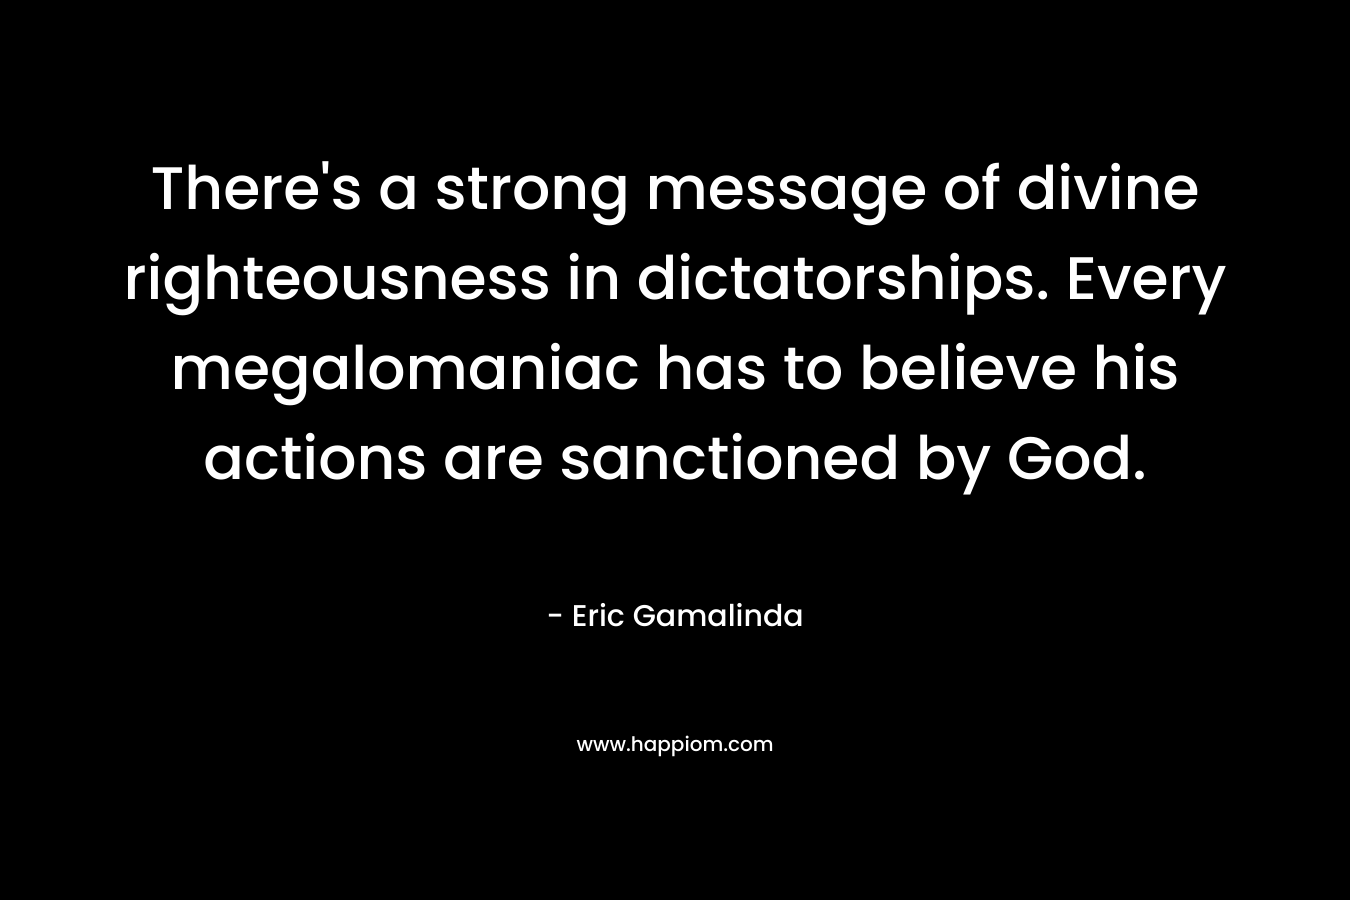 There’s a strong message of divine righteousness in dictatorships. Every megalomaniac has to believe his actions are sanctioned by God. – Eric Gamalinda